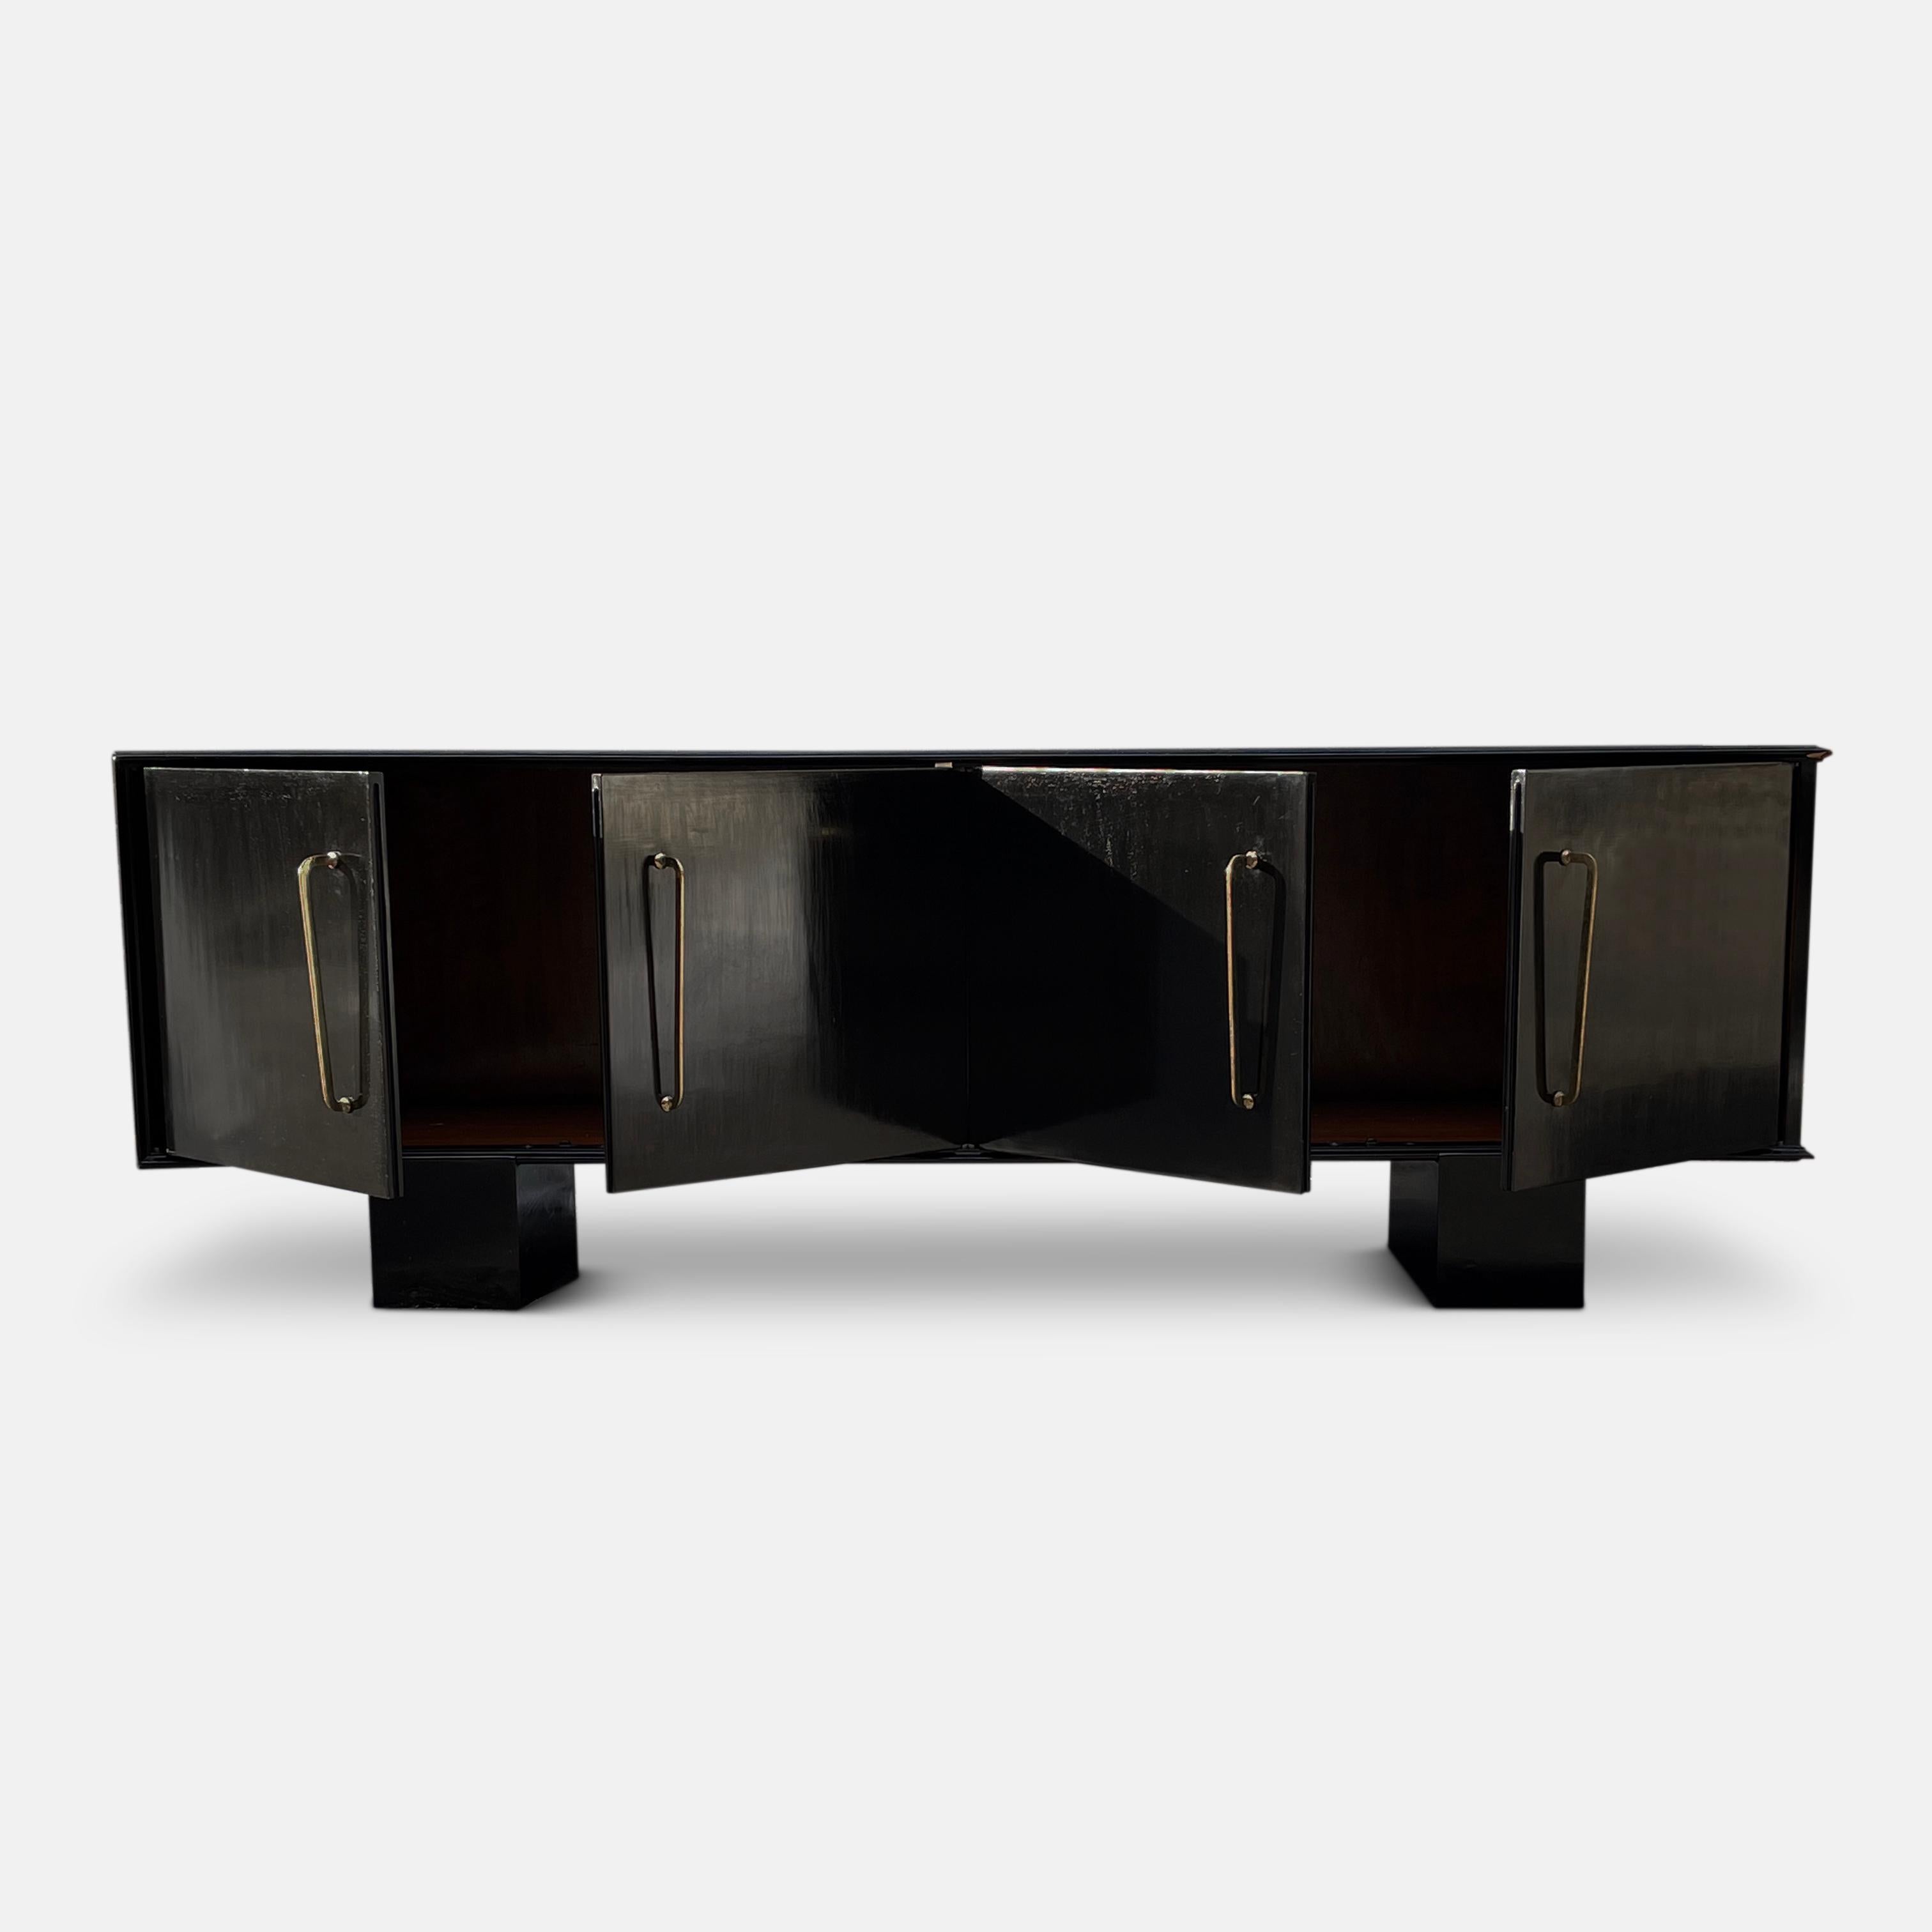 Modernist Art Deco Sideboard Attributed to Jacques Adnet, circa 1940 In Good Condition For Sale In London, GB